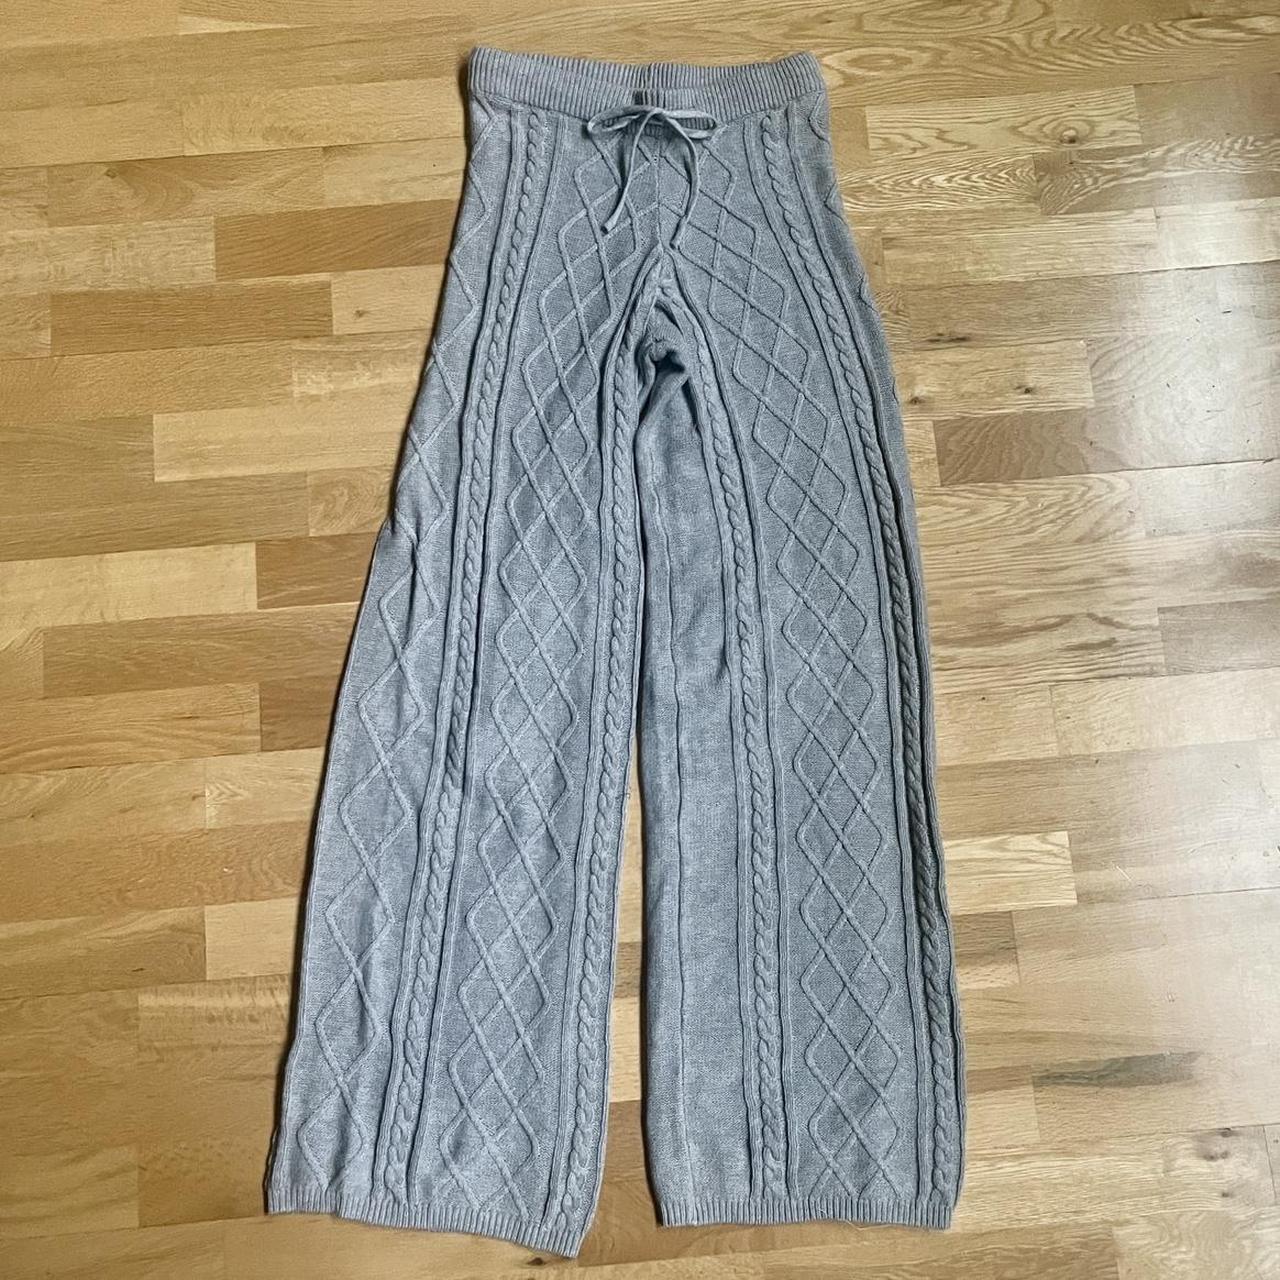 Edikted kasey grey cable knit pants The best and... Depop